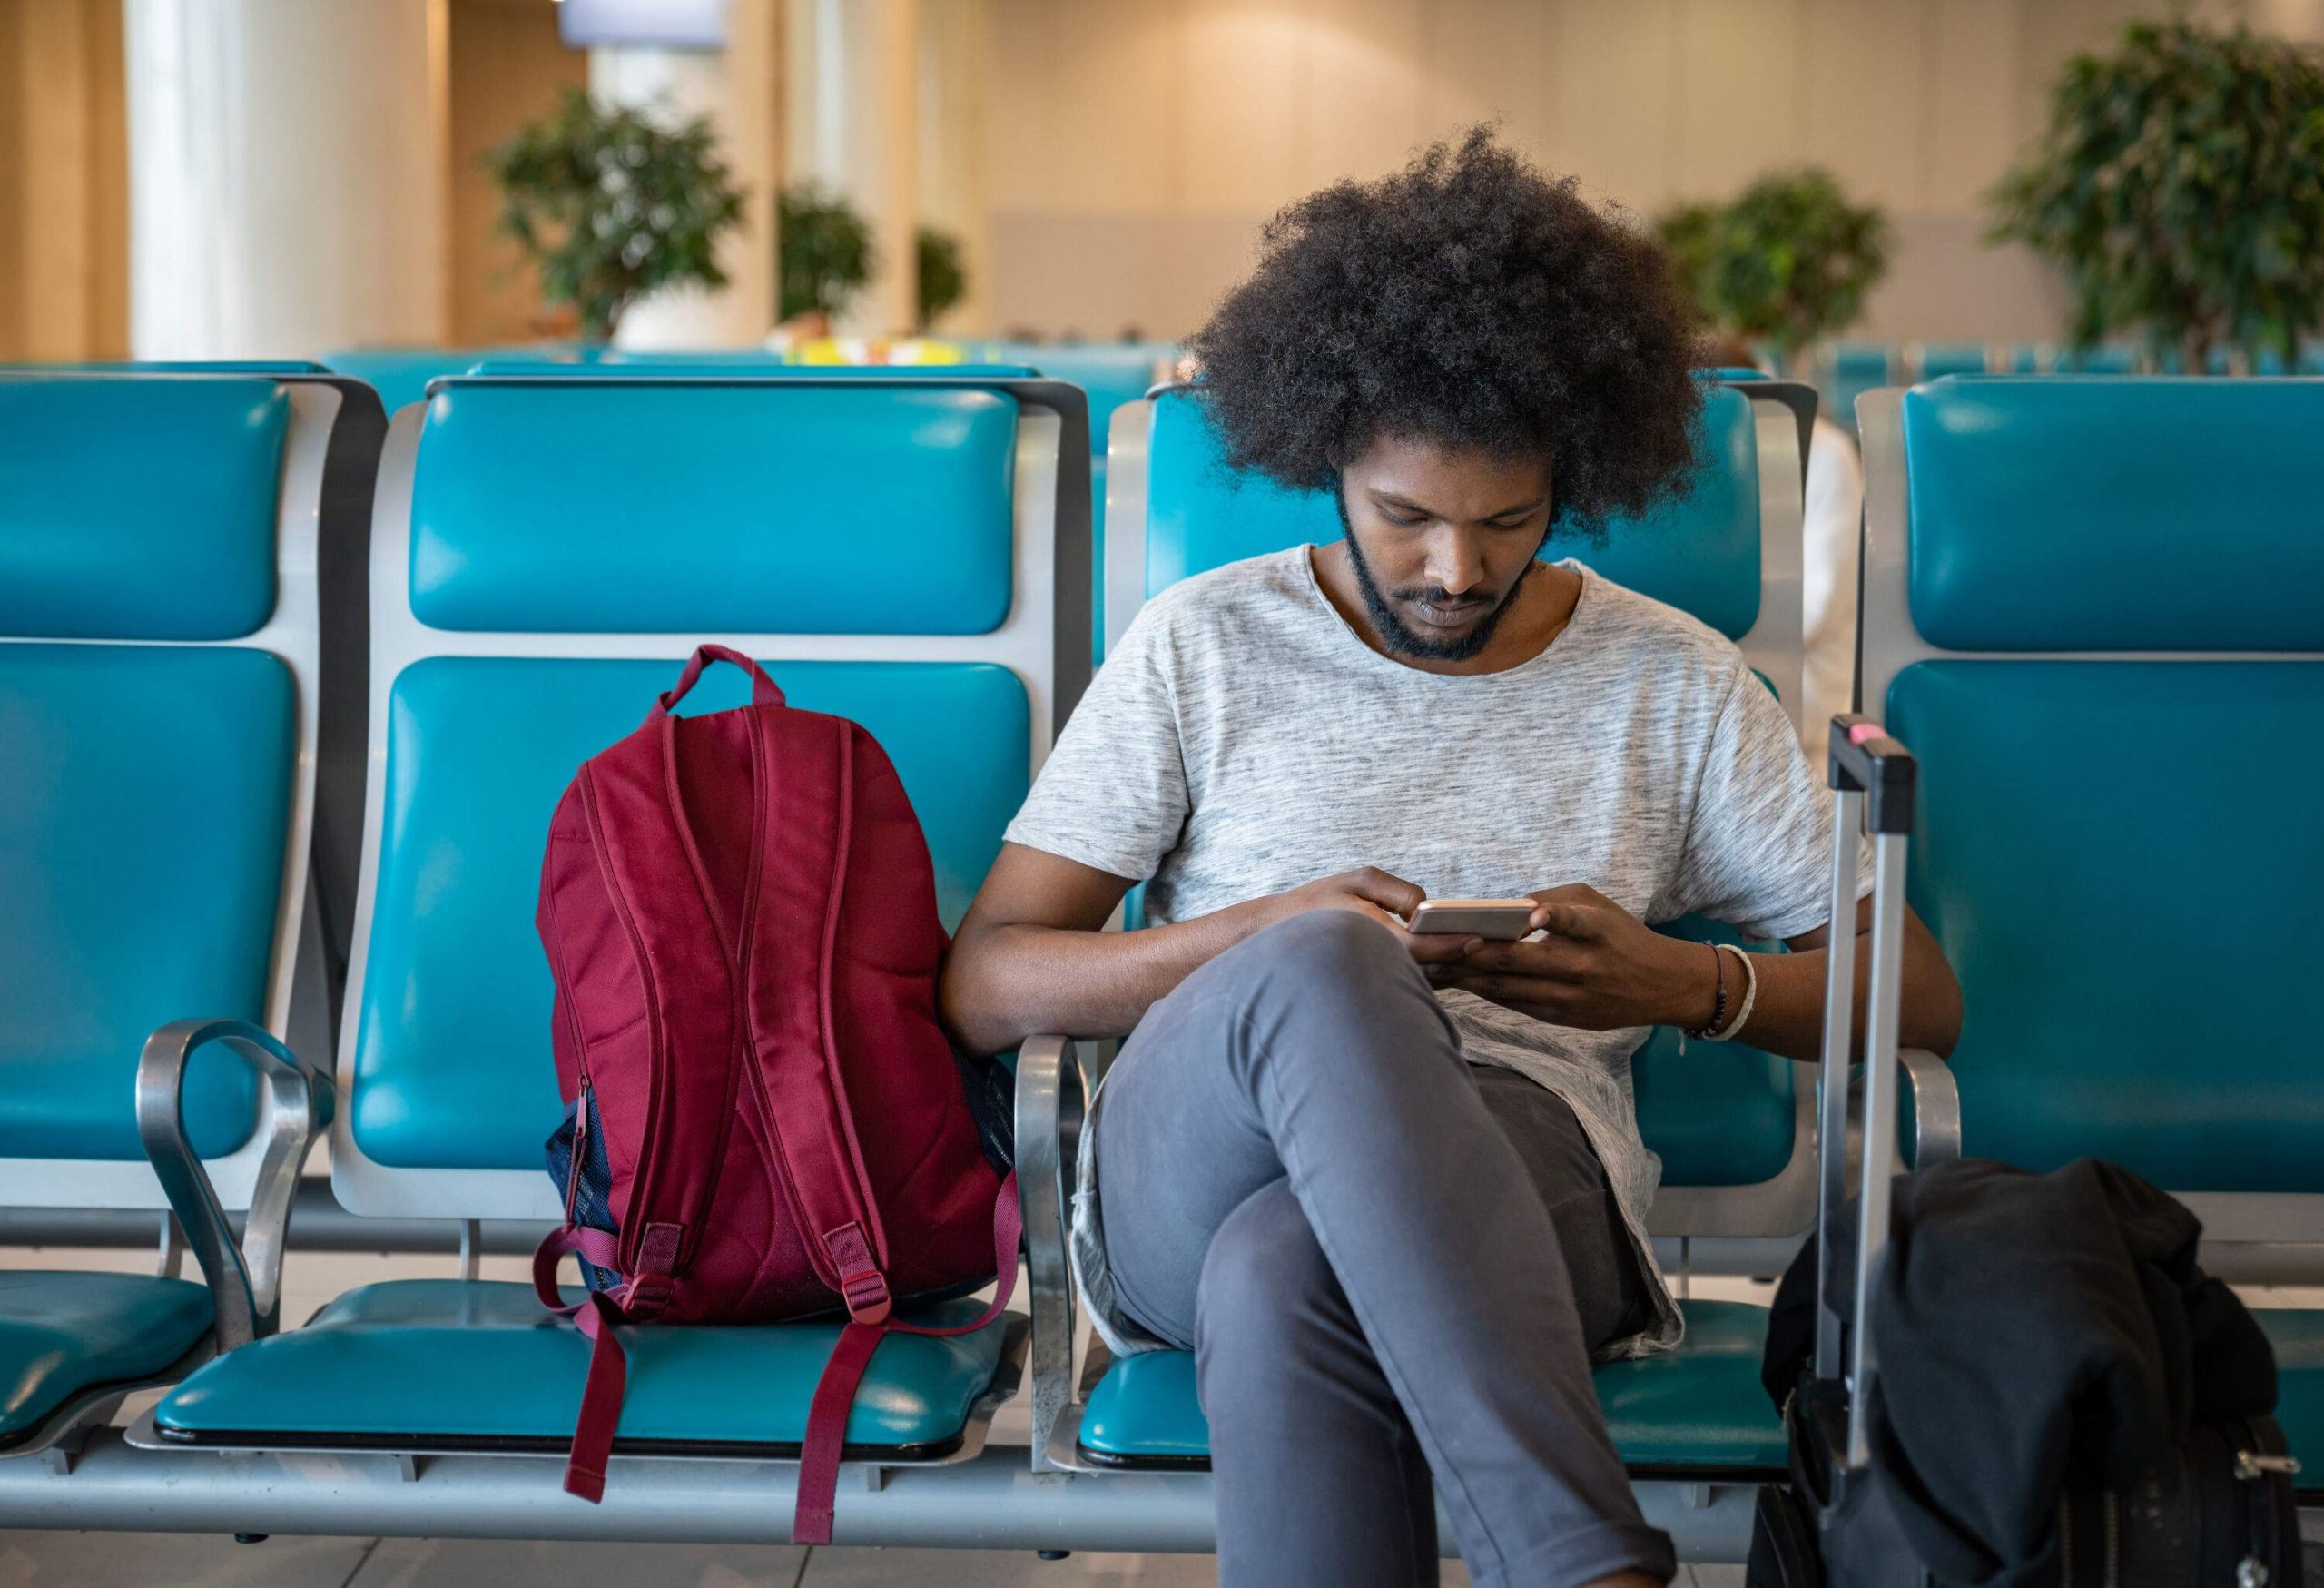 A man focused on his smartphone while sitting next to his bag at a terminal.